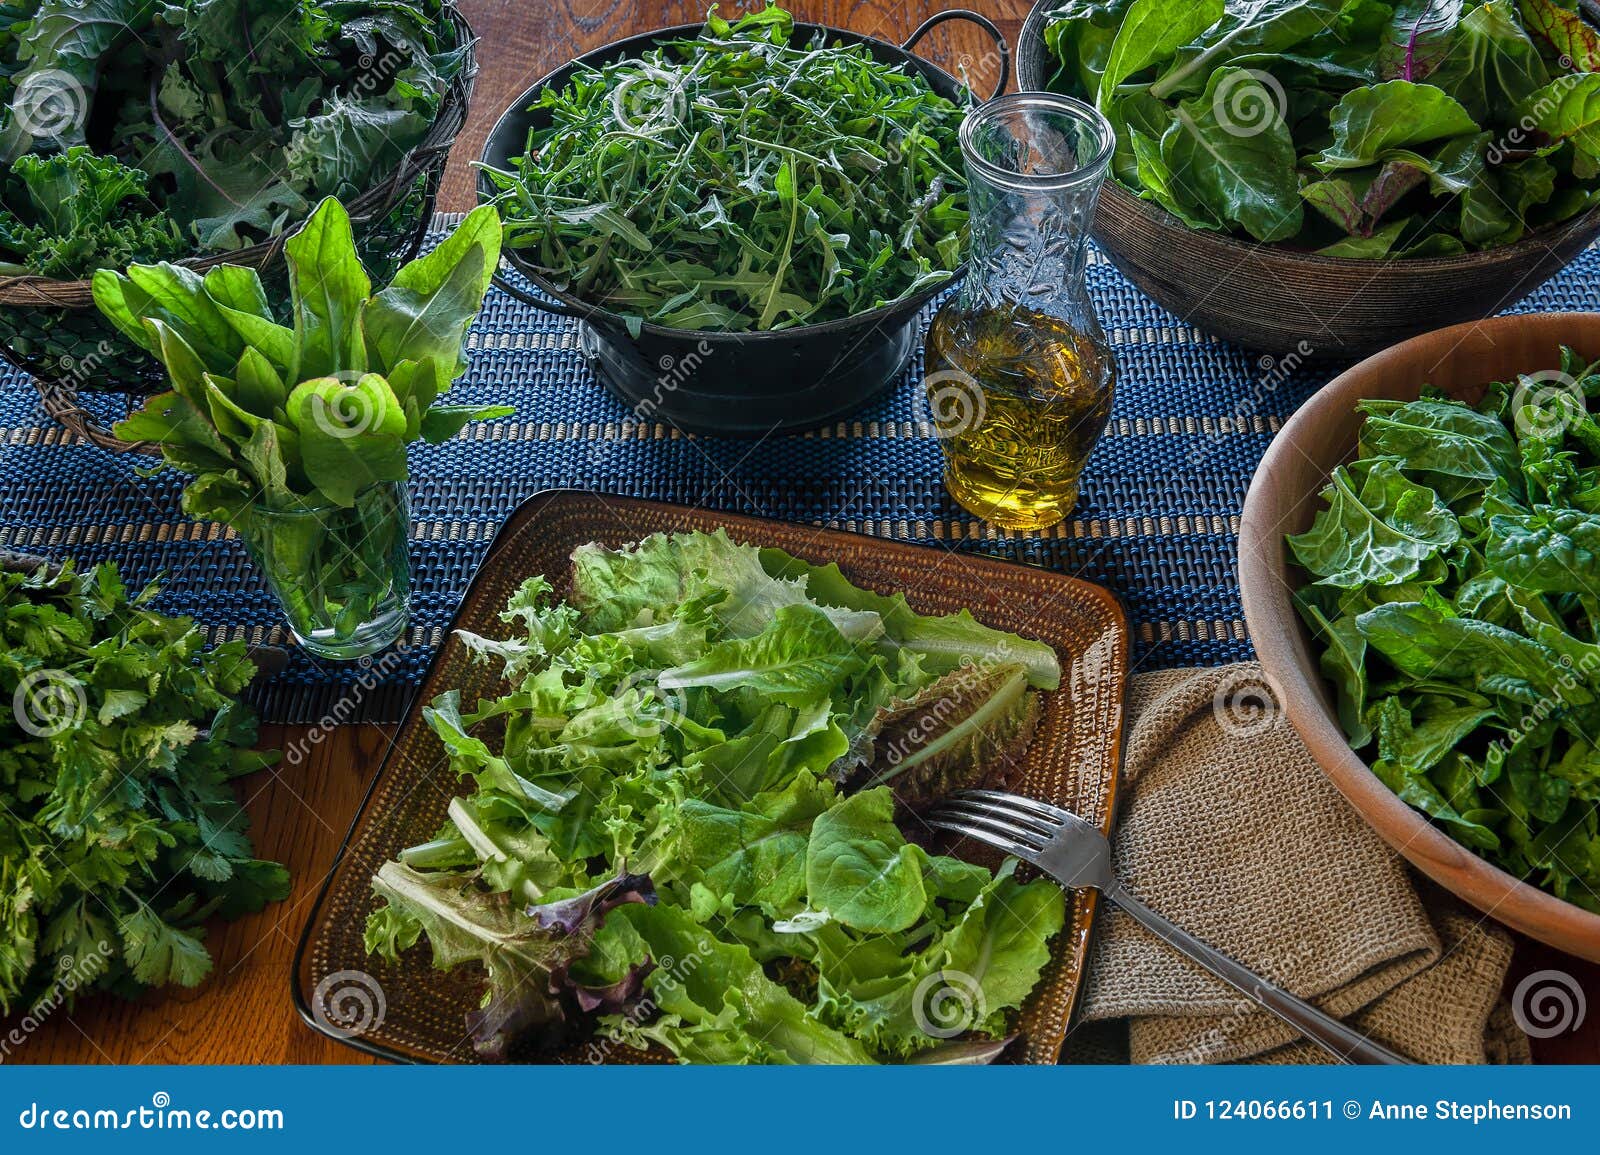 a variety of freshly picked leafy greens ready for salad making